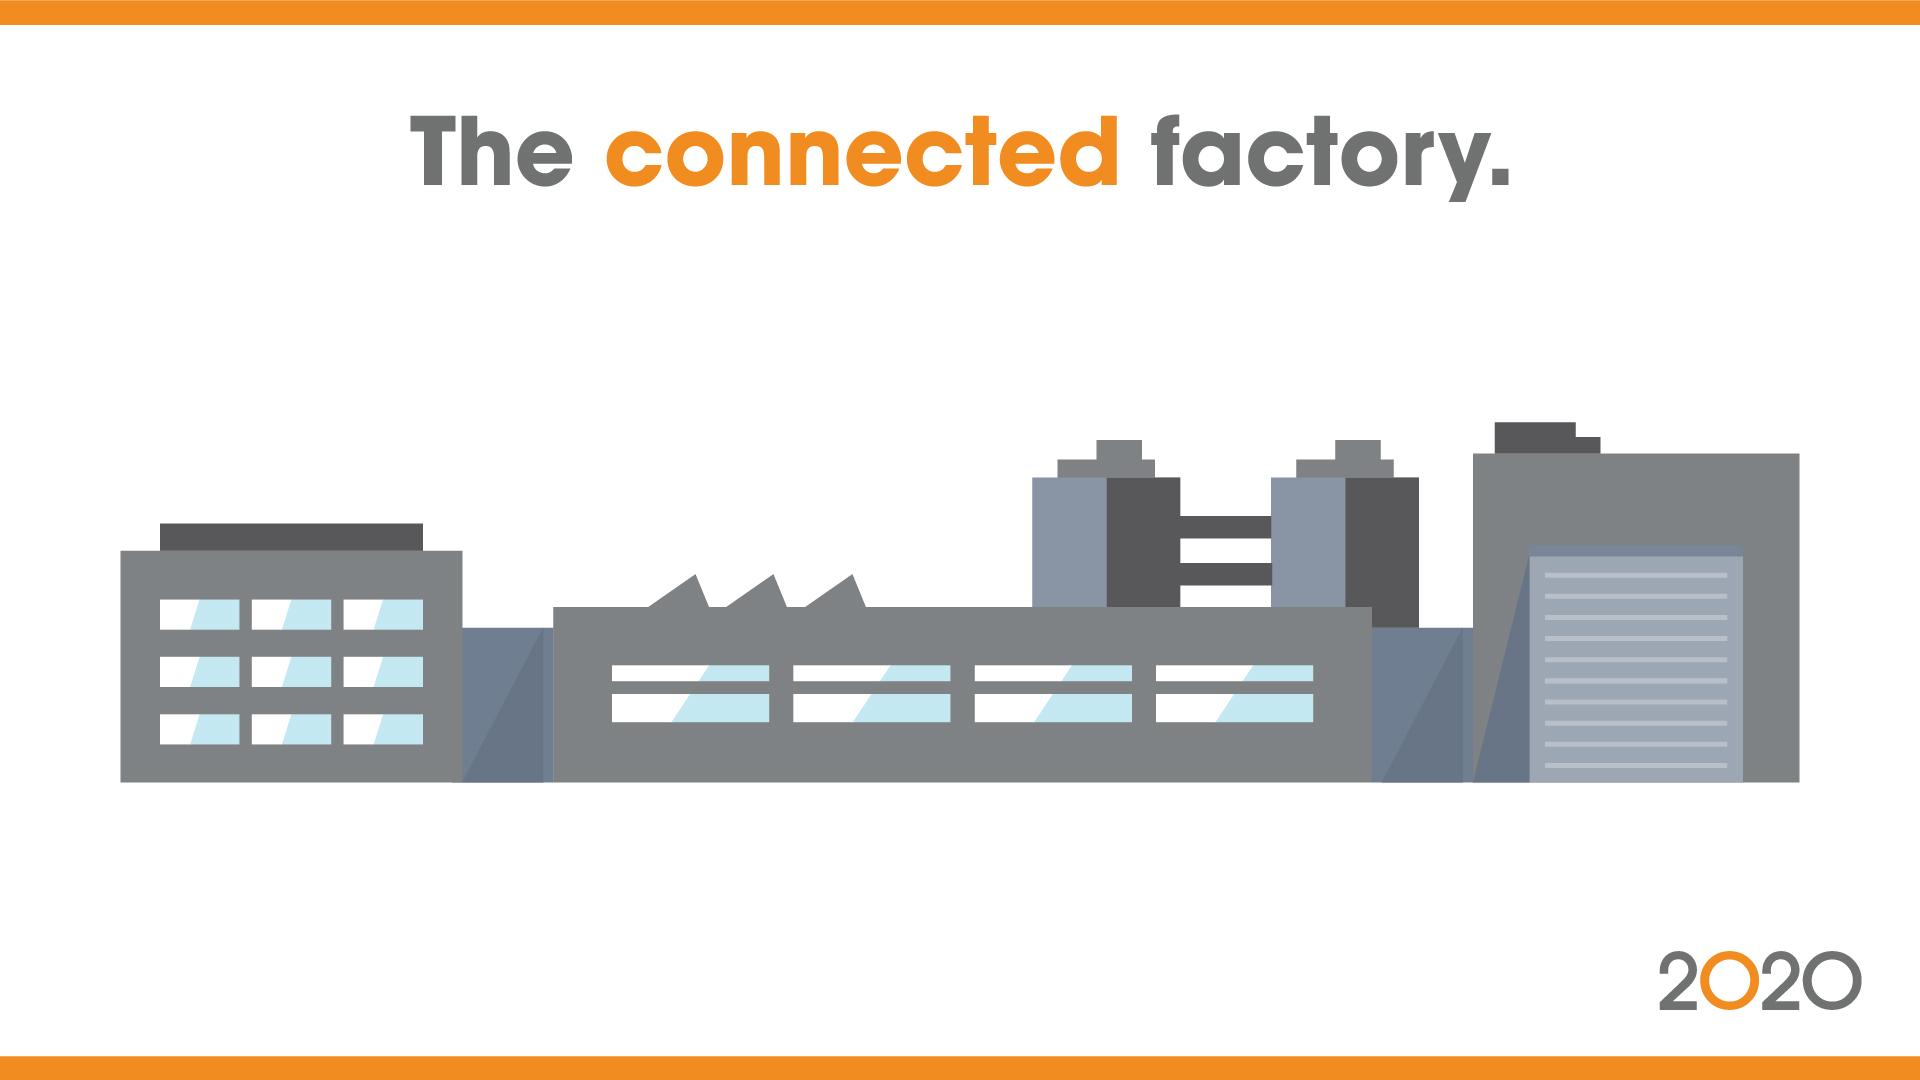 2020_connected_factory_1920x1080.jpg